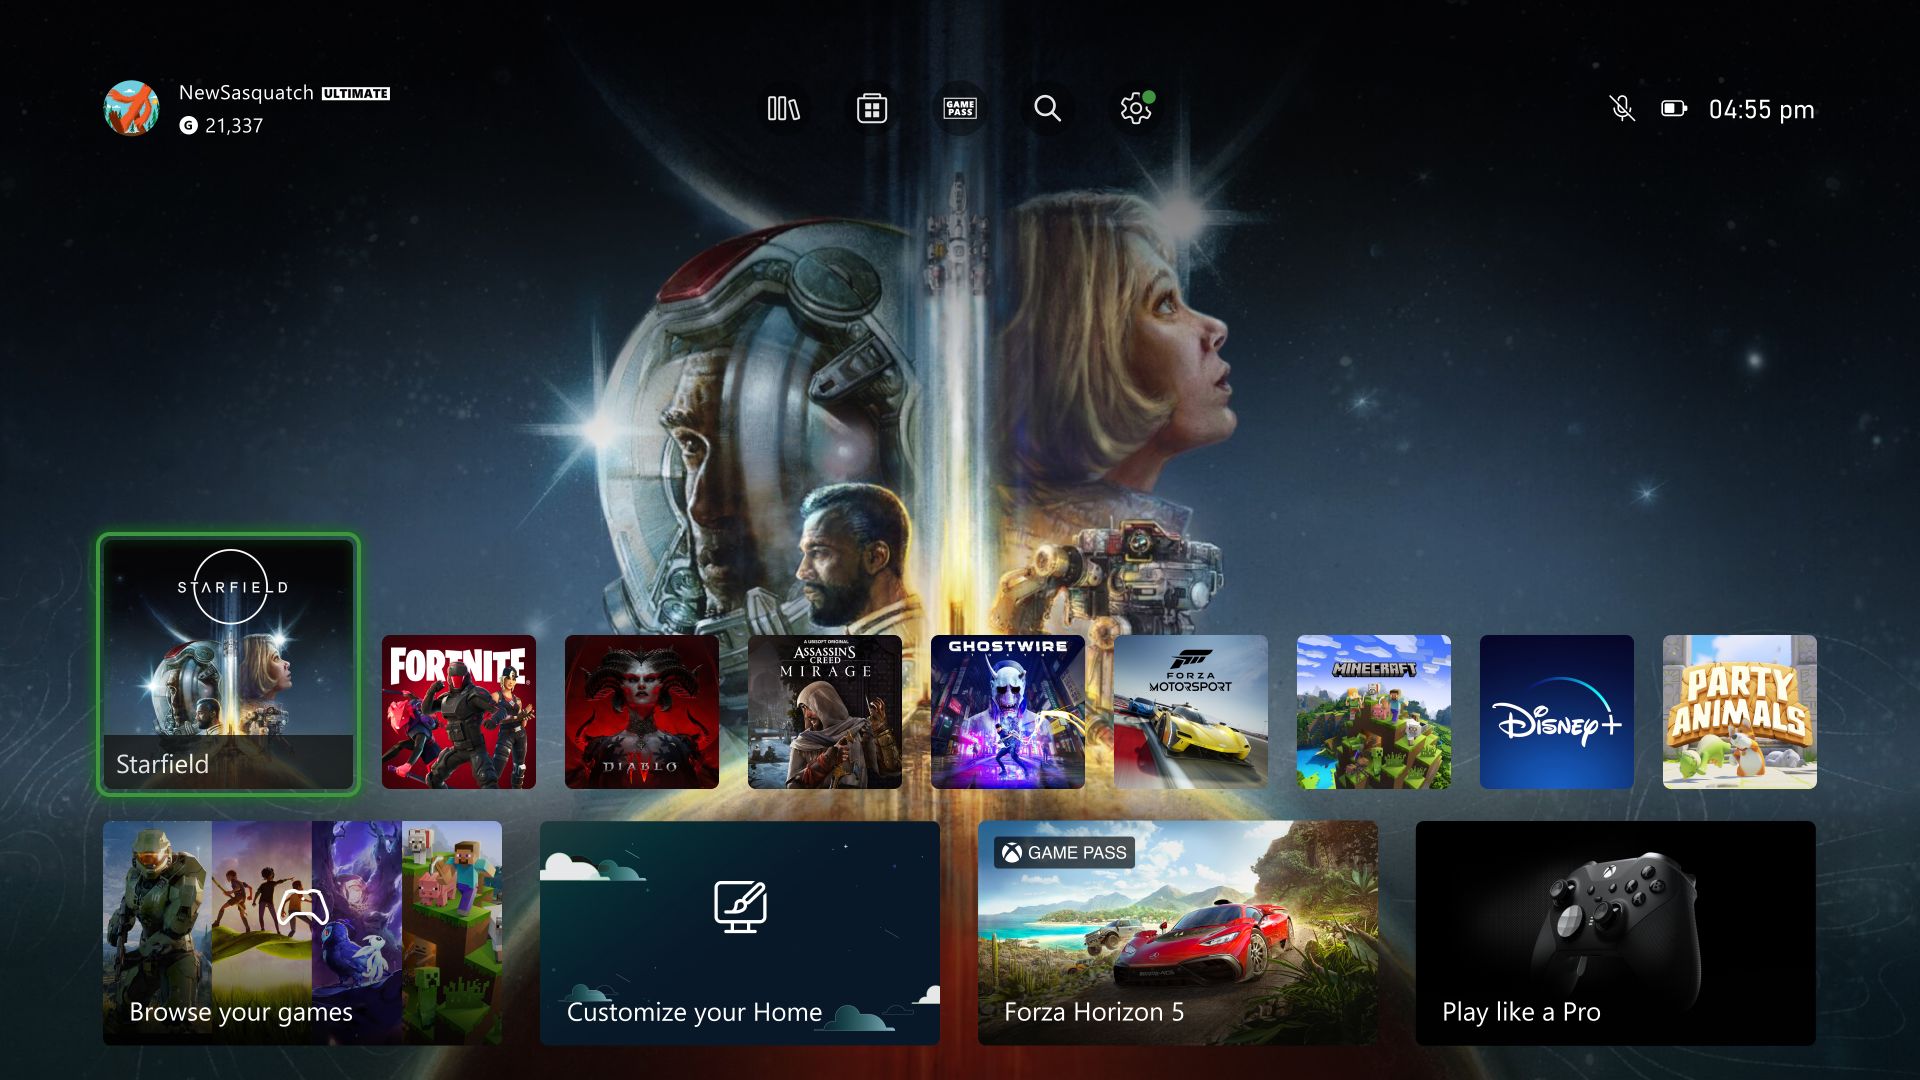 Xbox Announces New Homescreen for Users; Rolling Out in Waves in the Coming Weeks